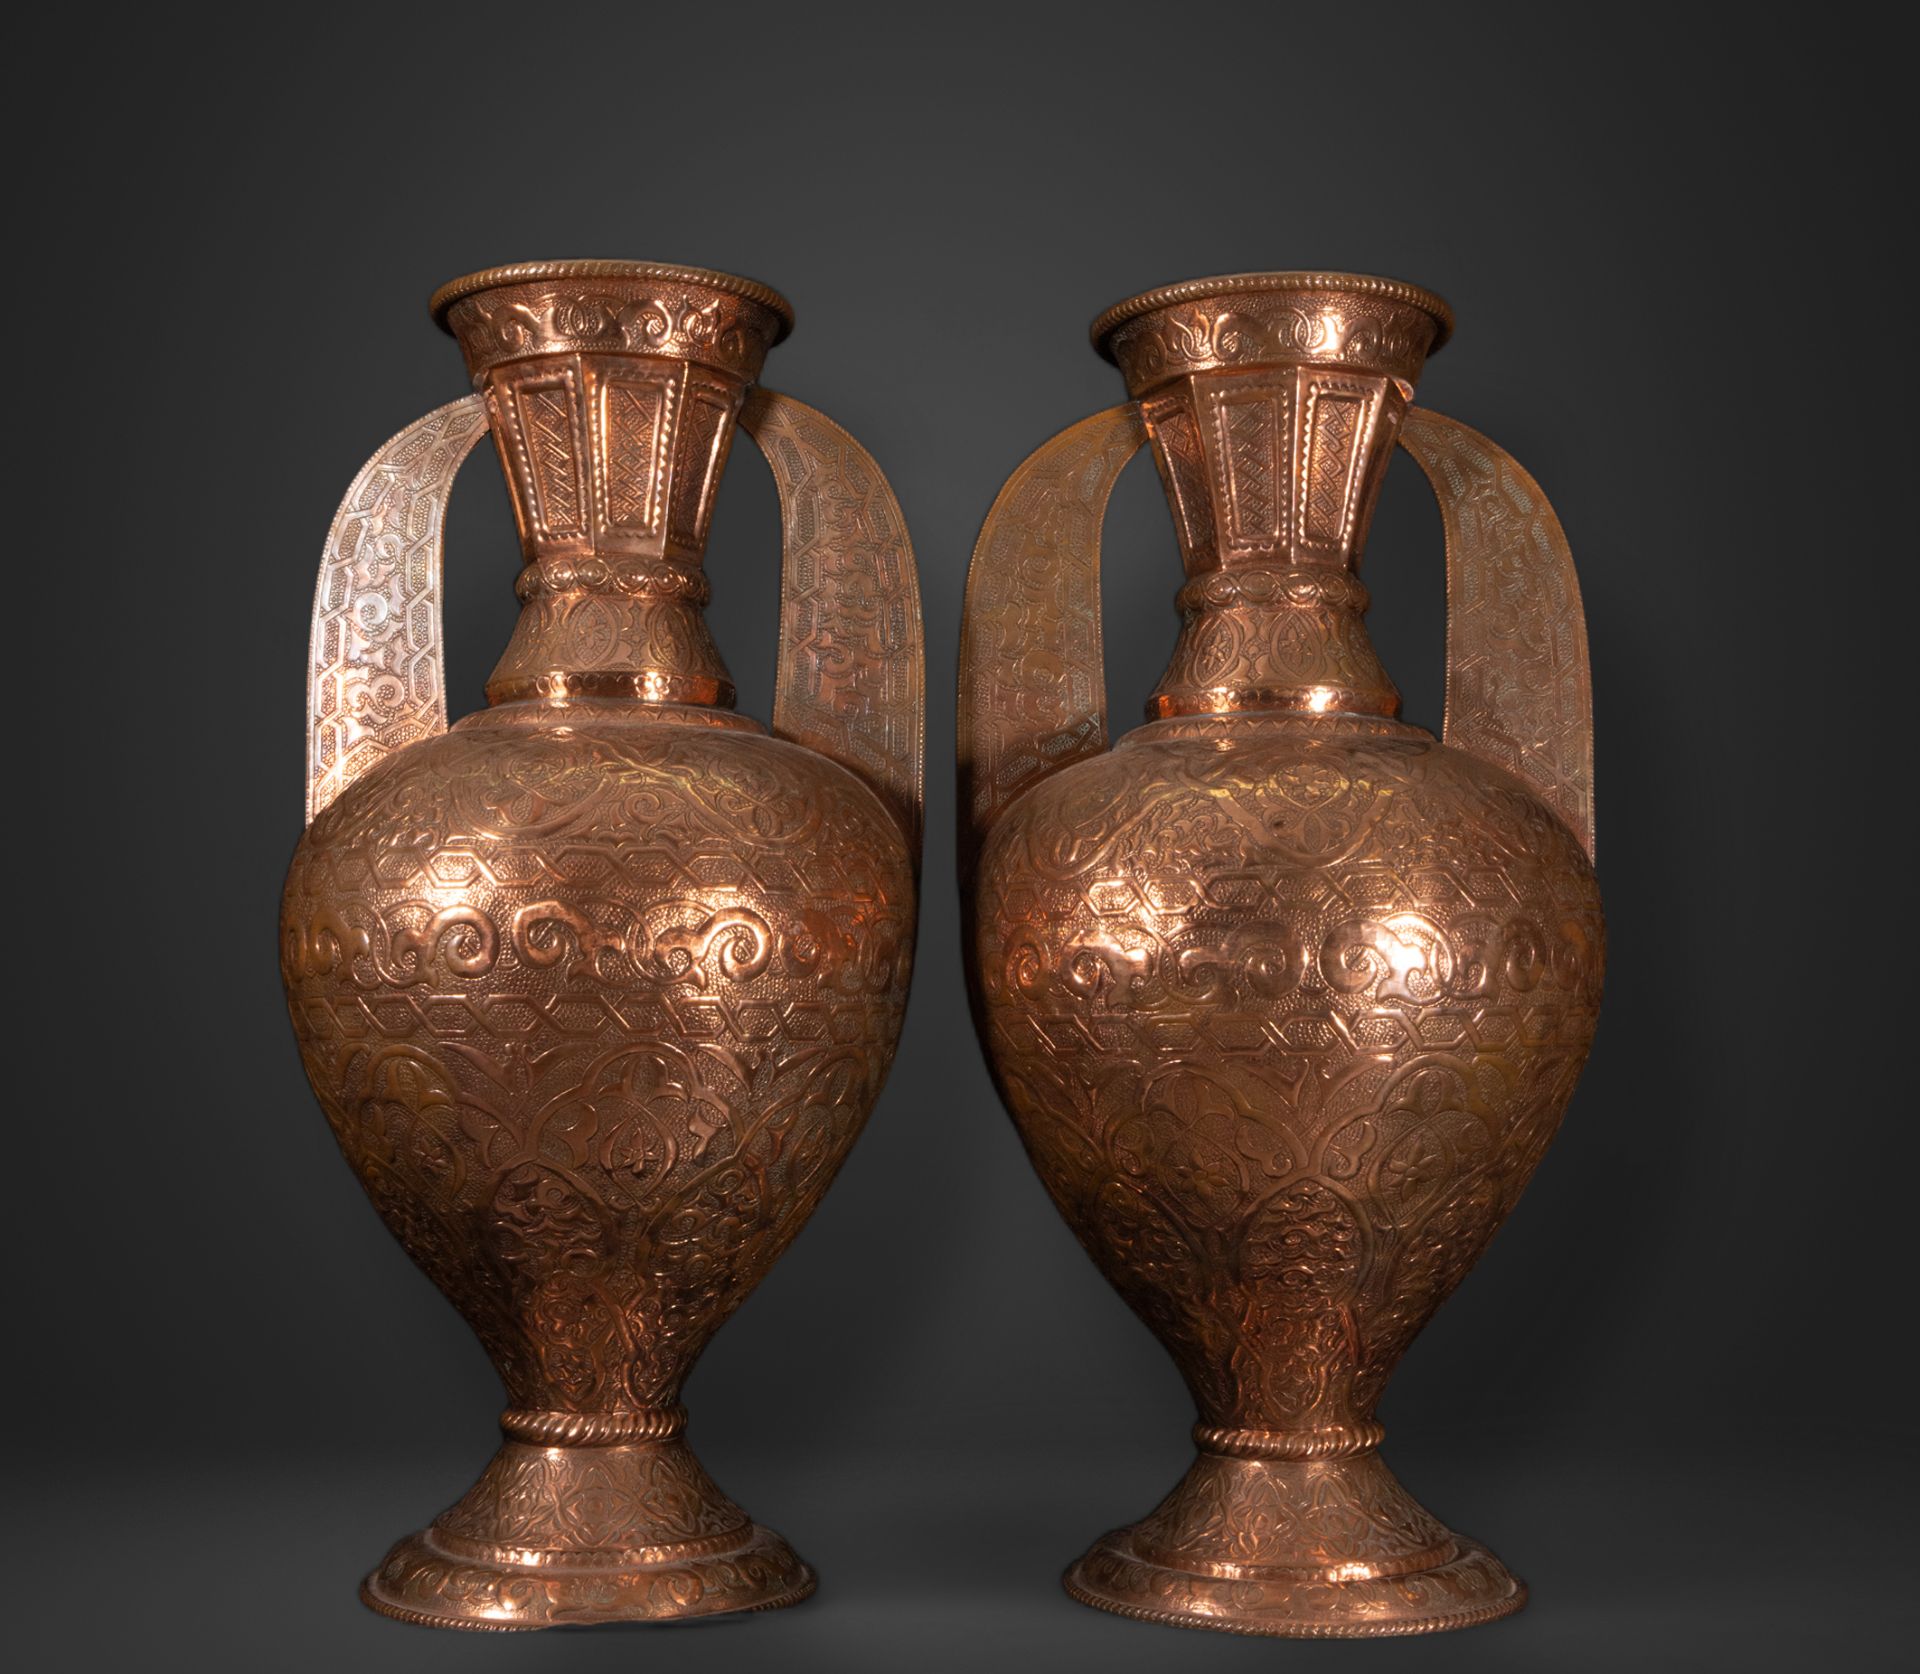 Pair of Large Embossed Copper Vases in the "Alhambra" style, Andalusian Granada work from the 19th c